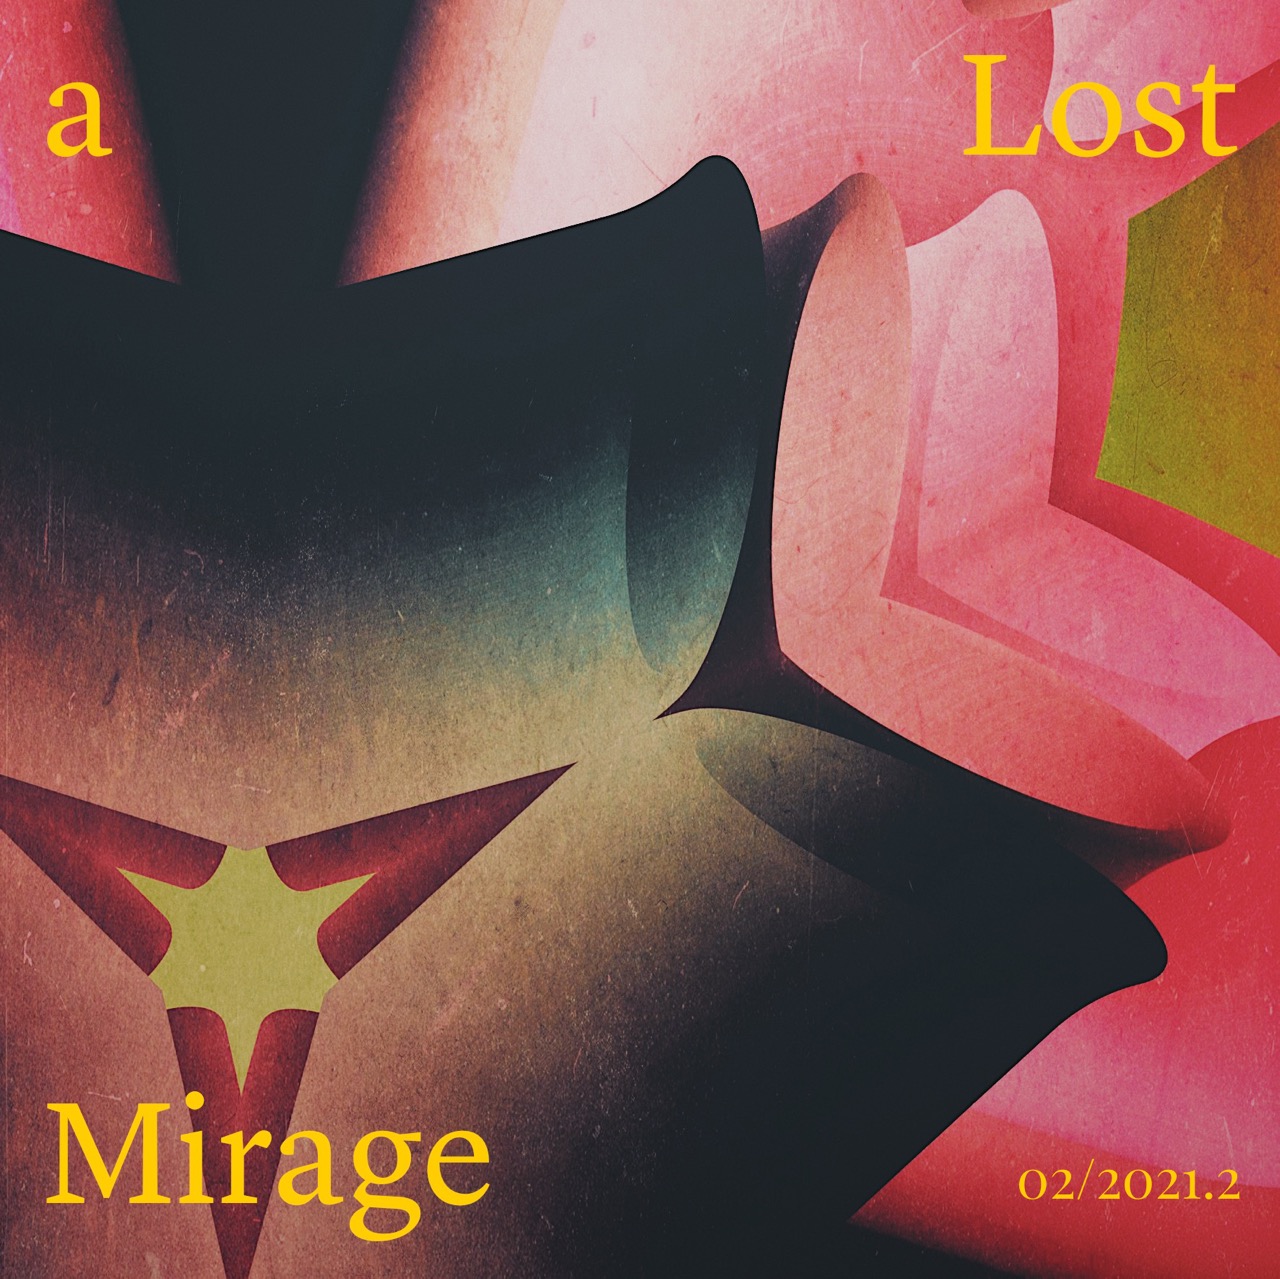 alostmirage